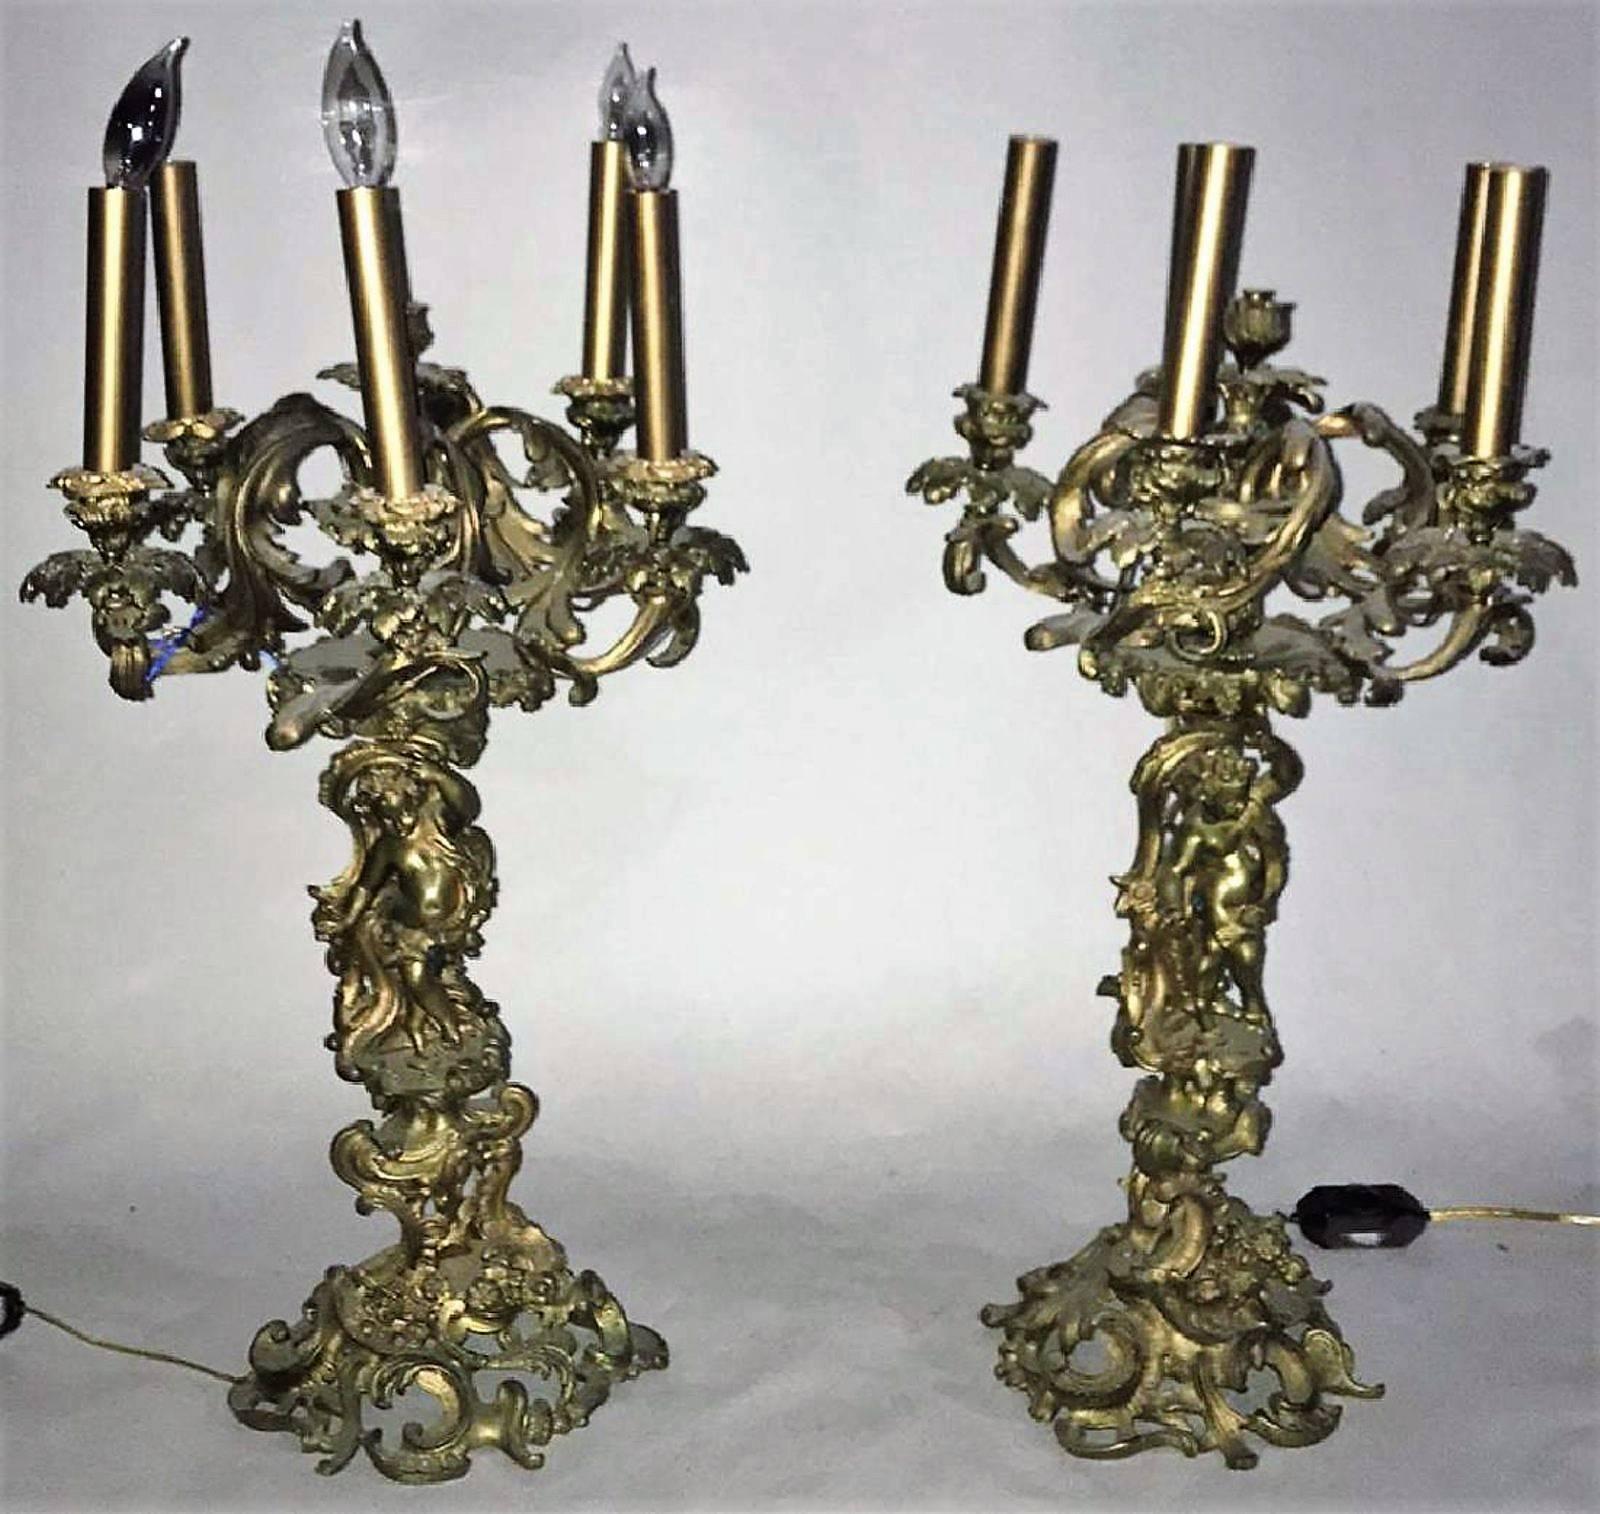 Superior pair of 19th century French Louis XV style bronze doré candelabra.

Each stem is surmounted by gold-gilded acanthus leaf scrolled arms with 6-lights above a full cherub and ornate base designed in the Rococo fashion,

circa: 1870